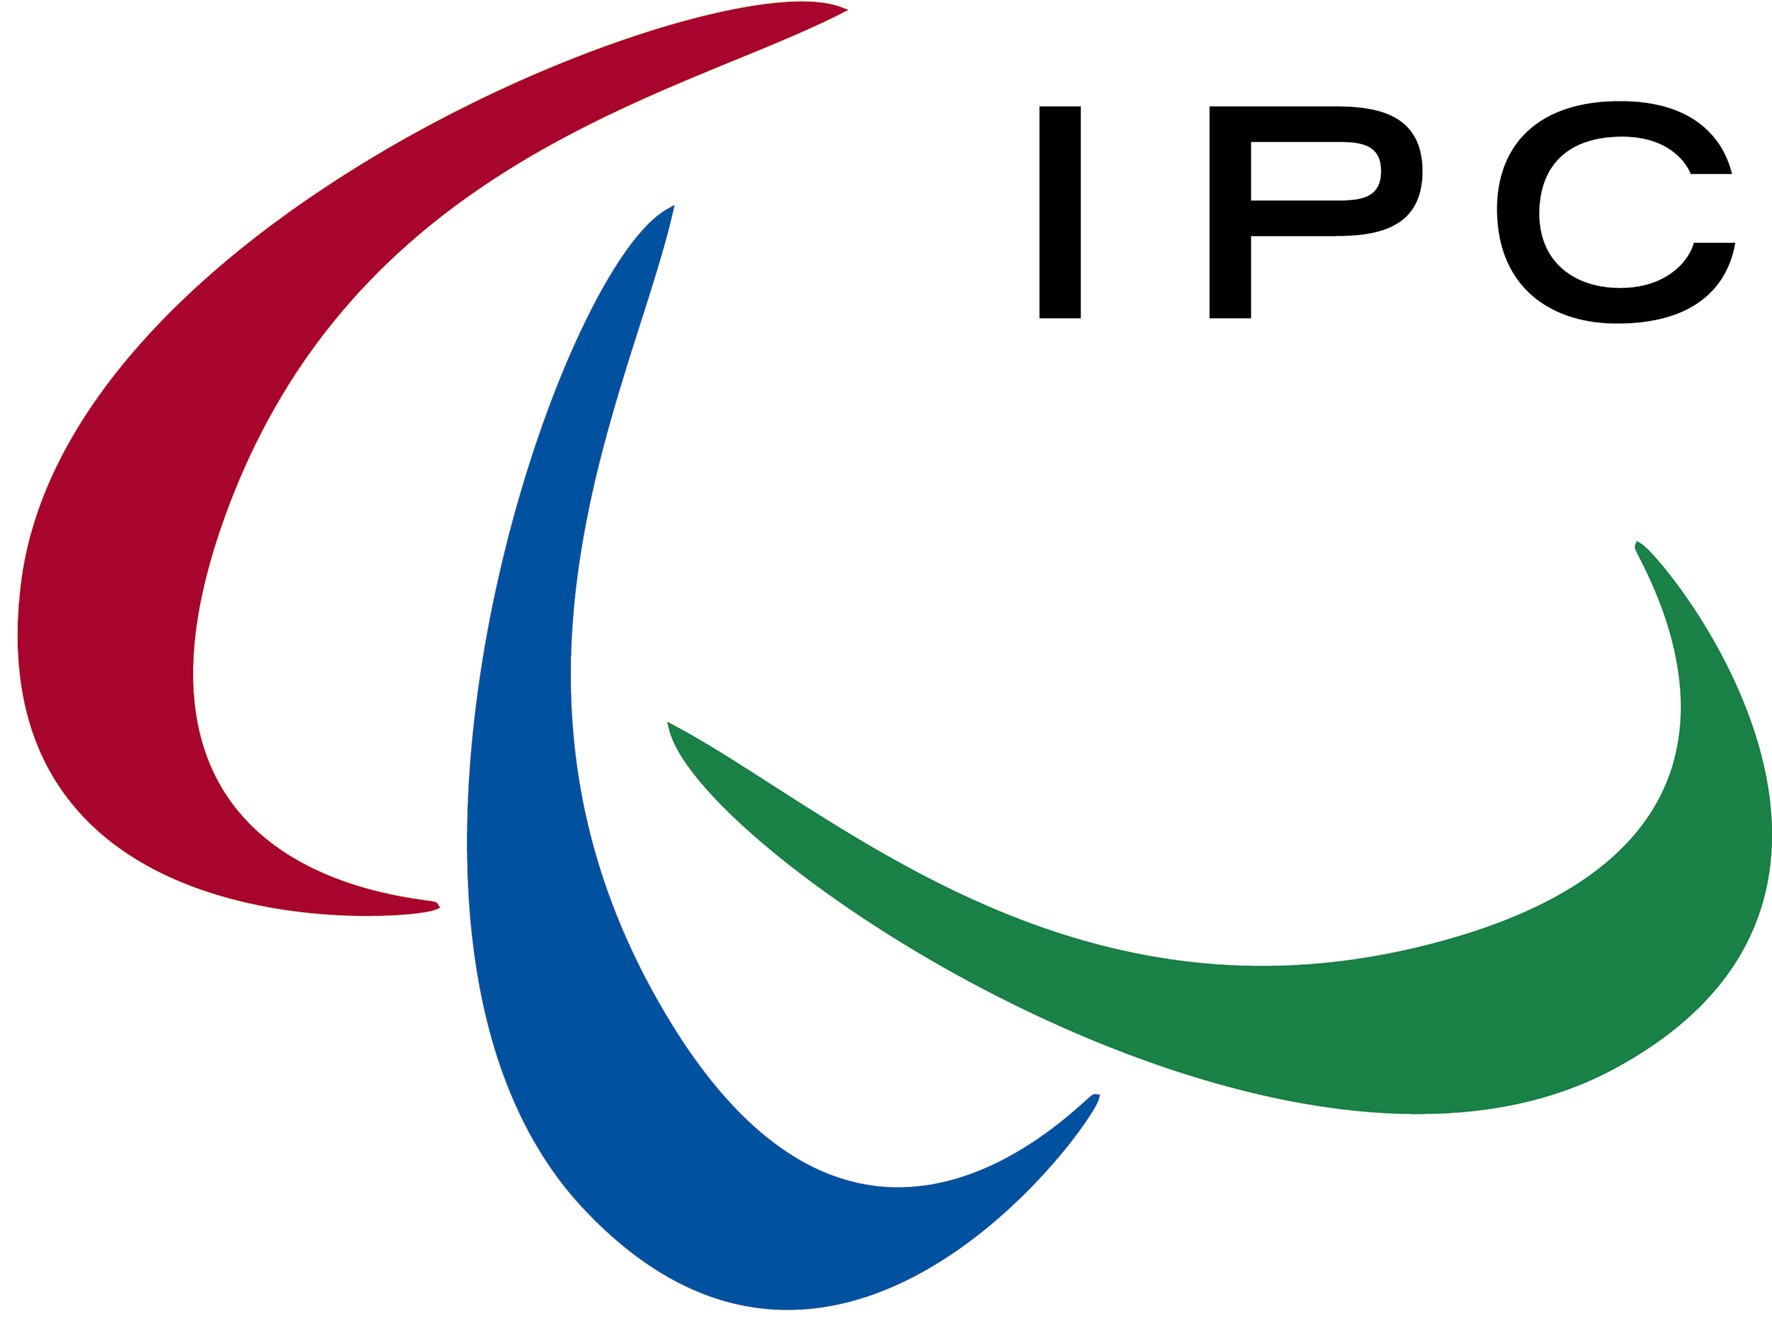 The IPC has announced the beginning of its process to add new events to the Paralympic programme in 2020